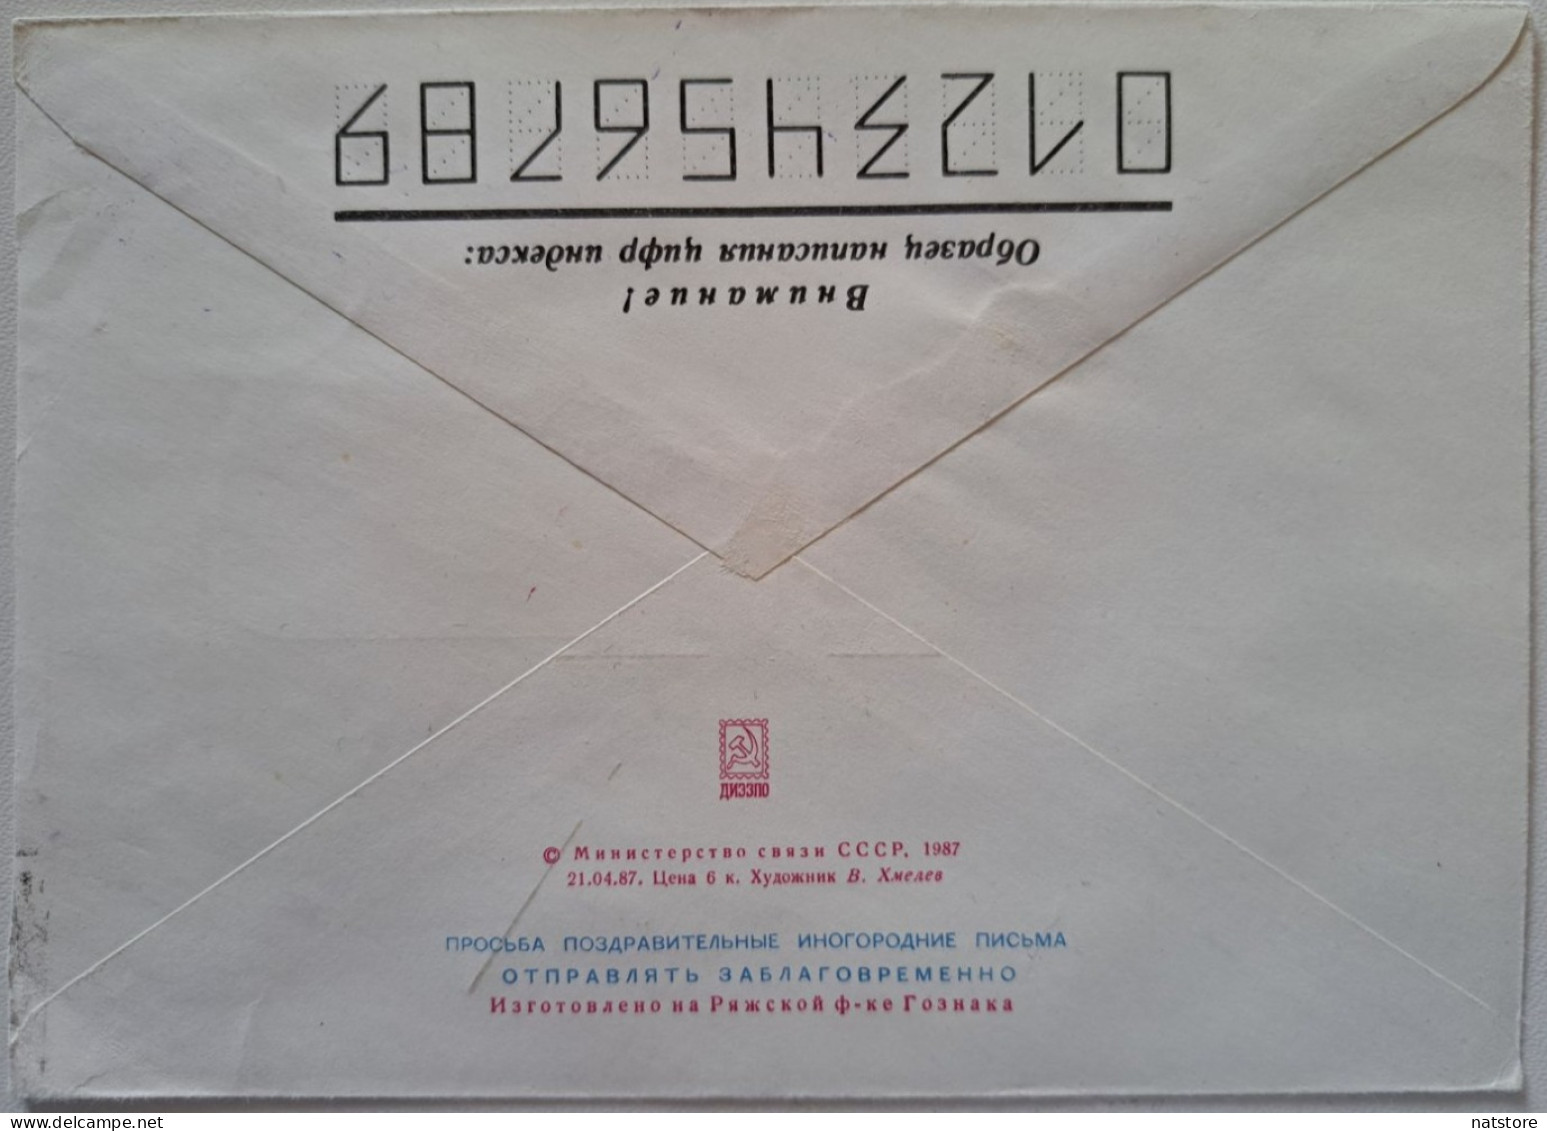 1987..USSR..COVER WITH STAMP..PAST MAIL..GLORY TO GREAT OCTOBER - Covers & Documents